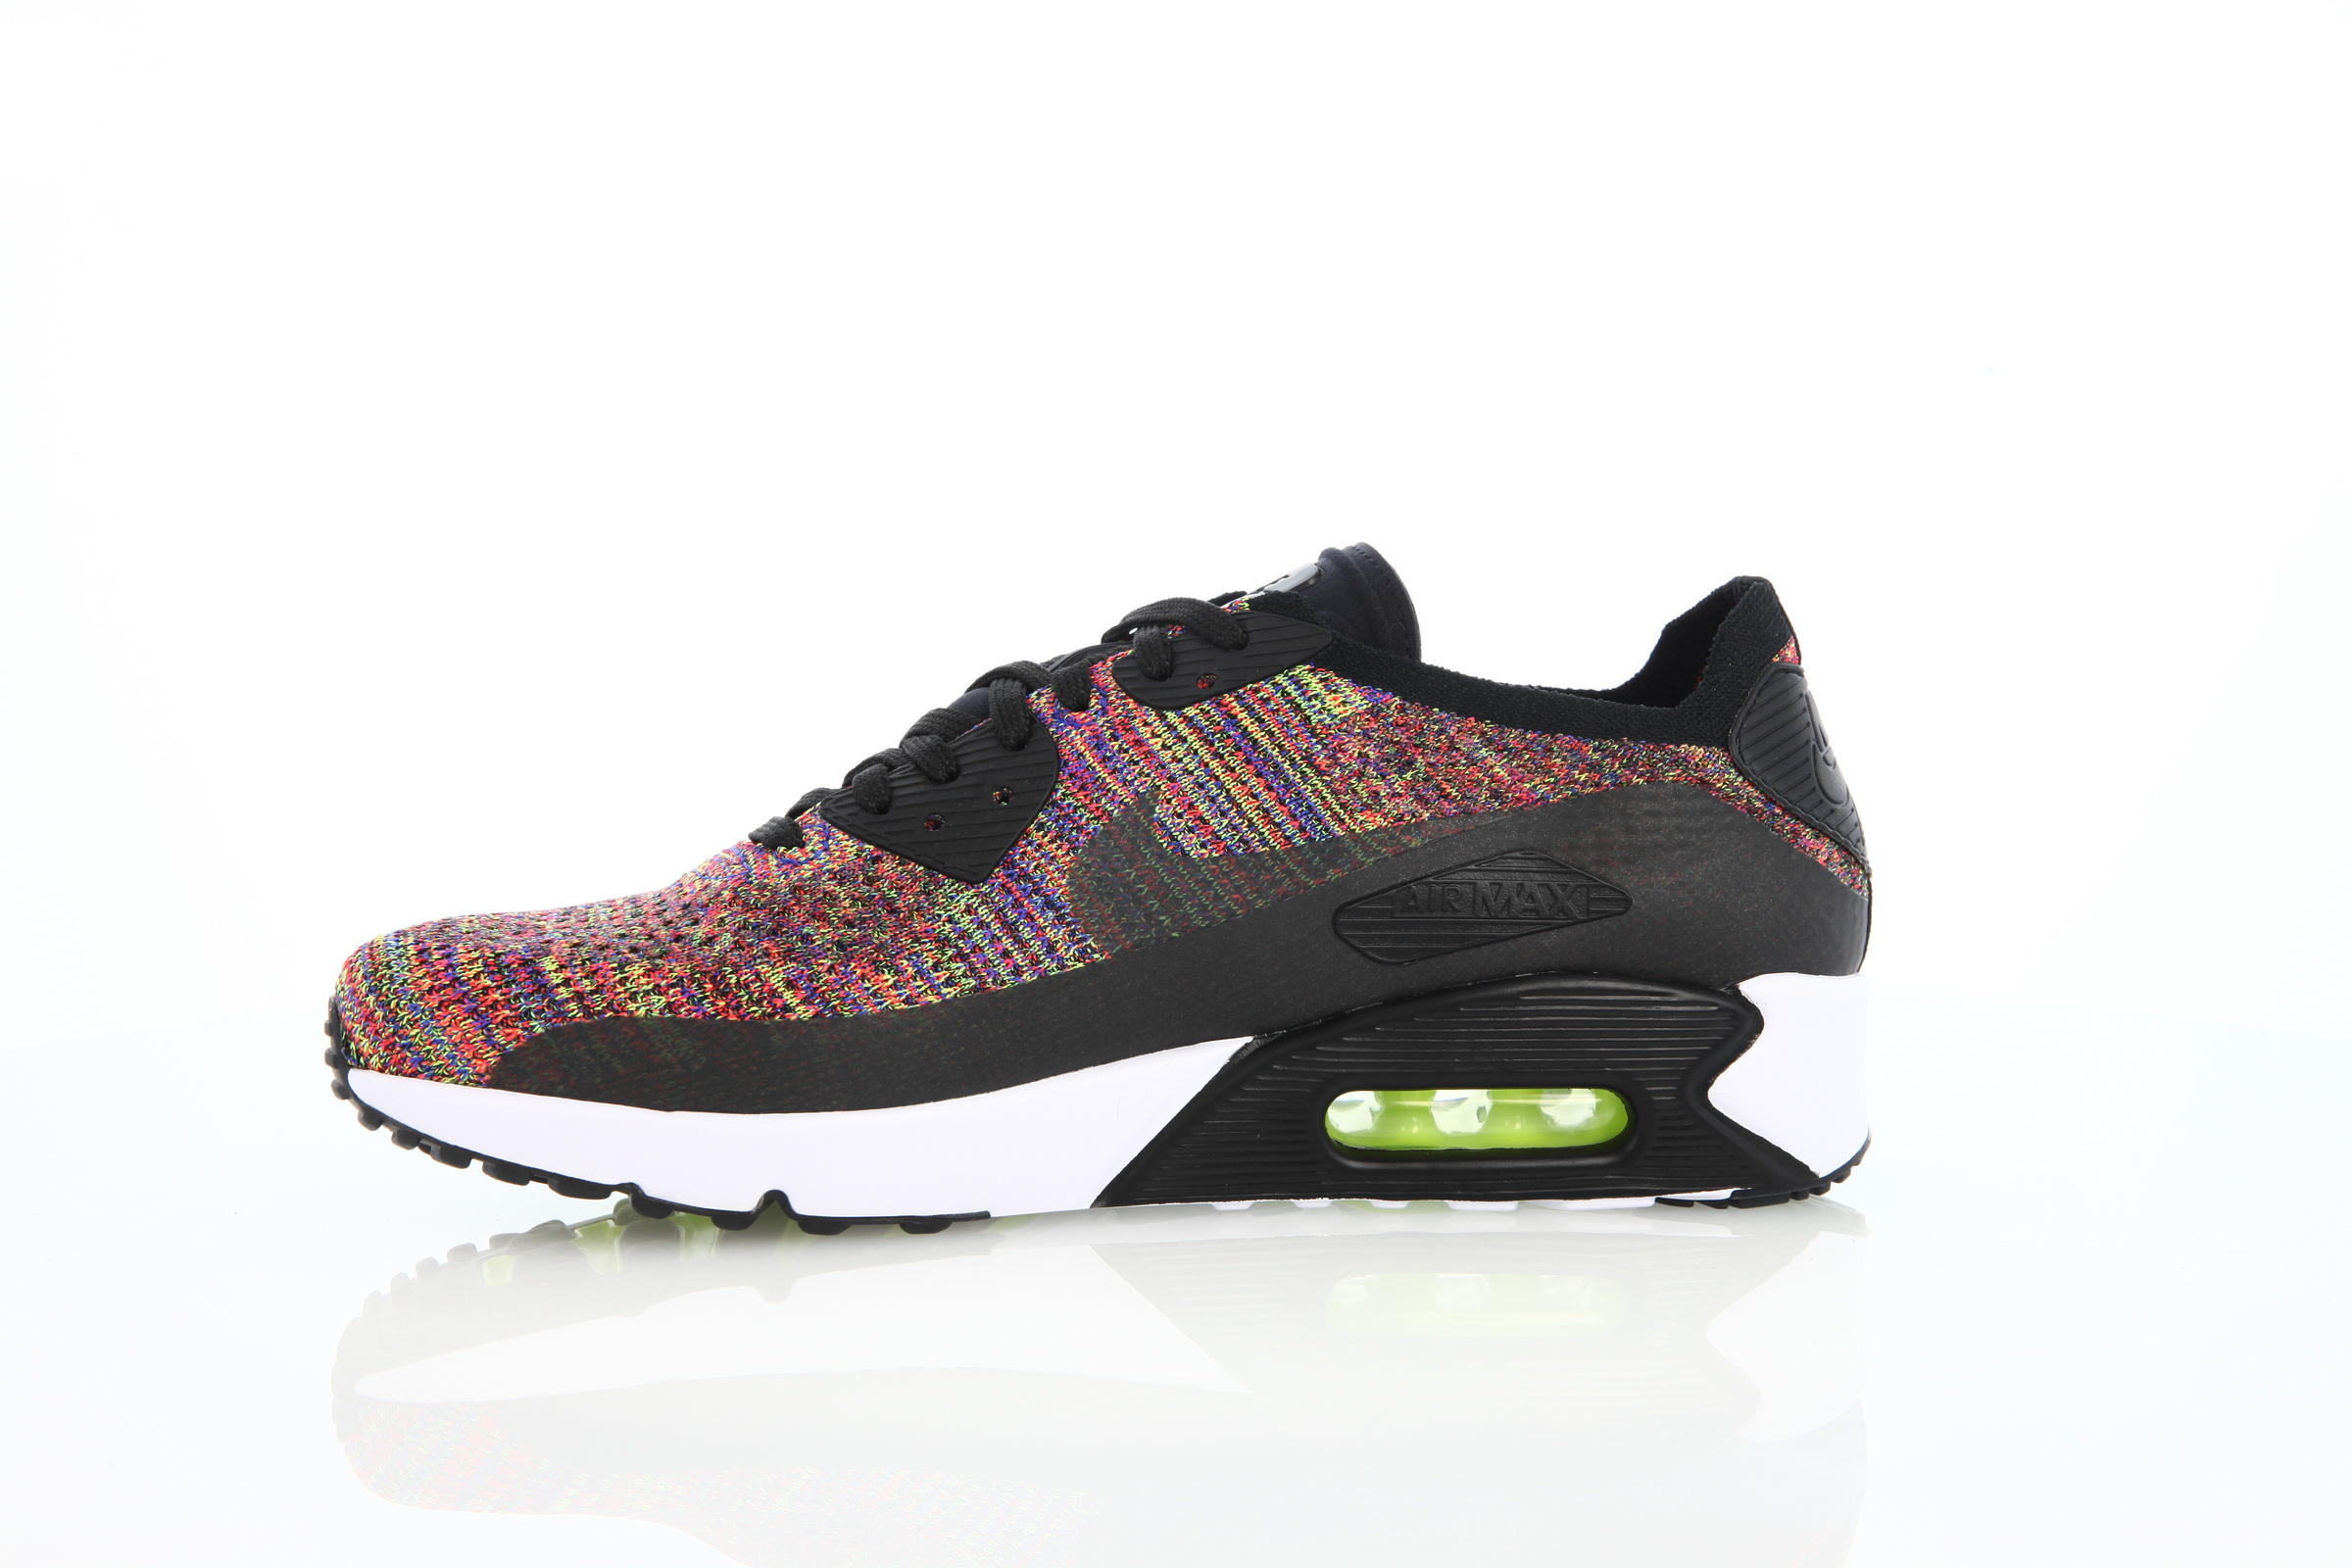 Nike Air Max 90 Ultra 2.0 Flyknit "Multicolor"